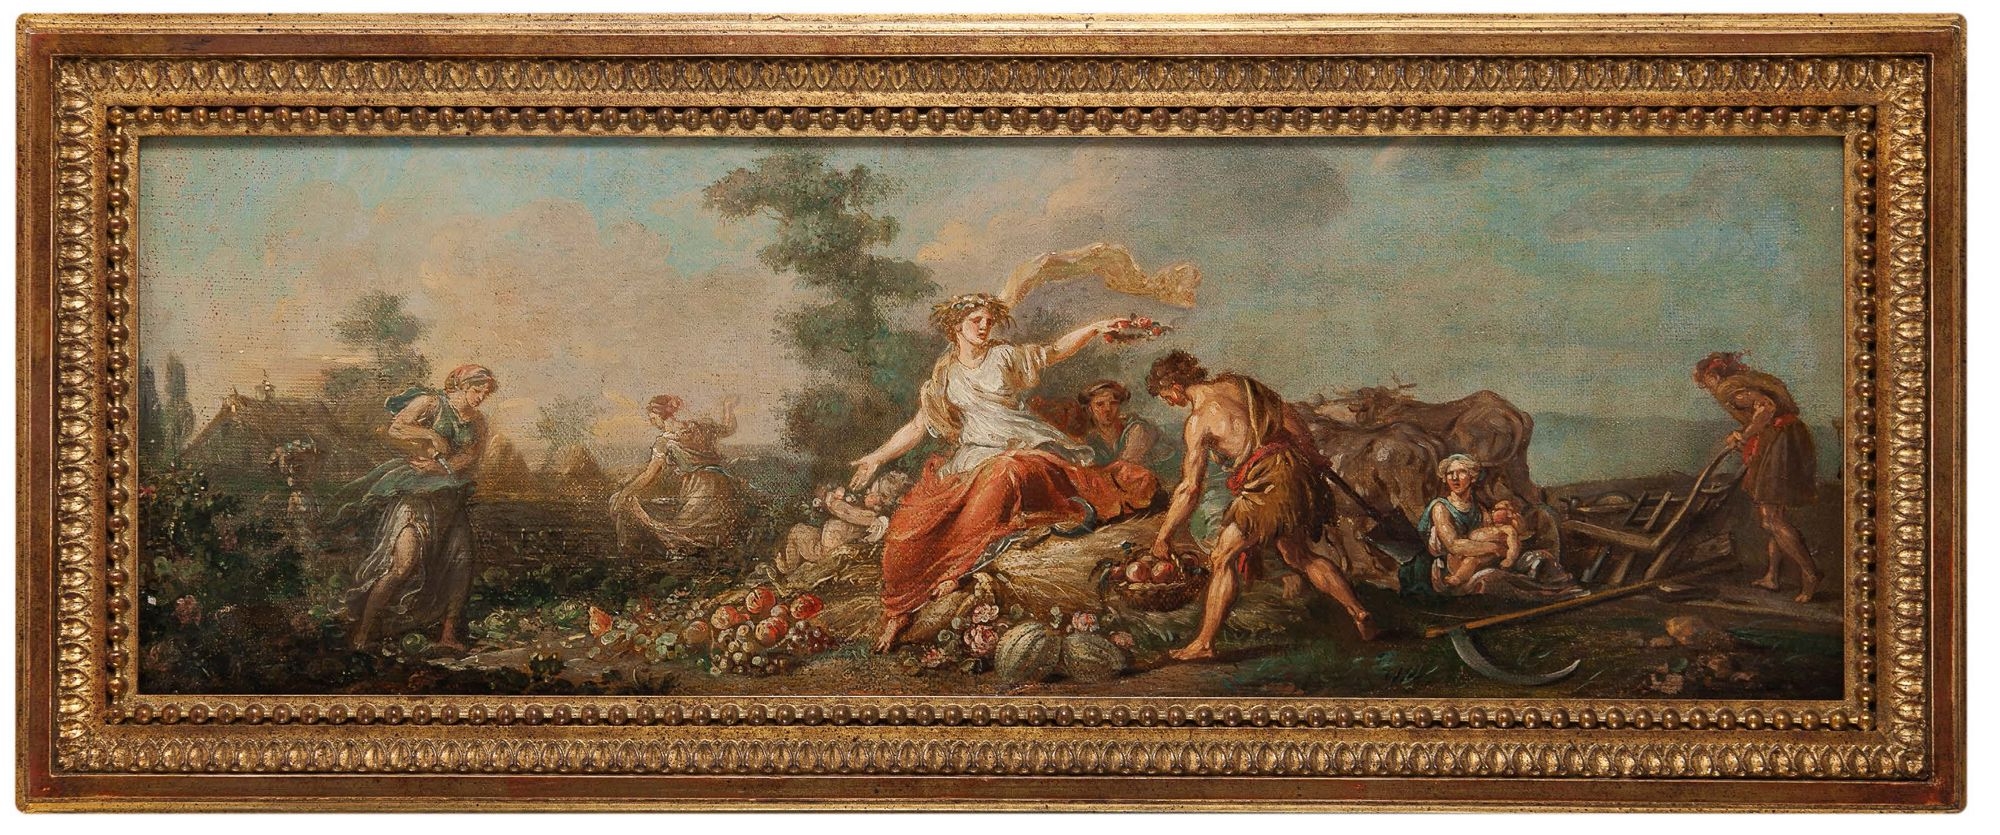 Summer or allegory of agriculture by Antoine Francois Callet